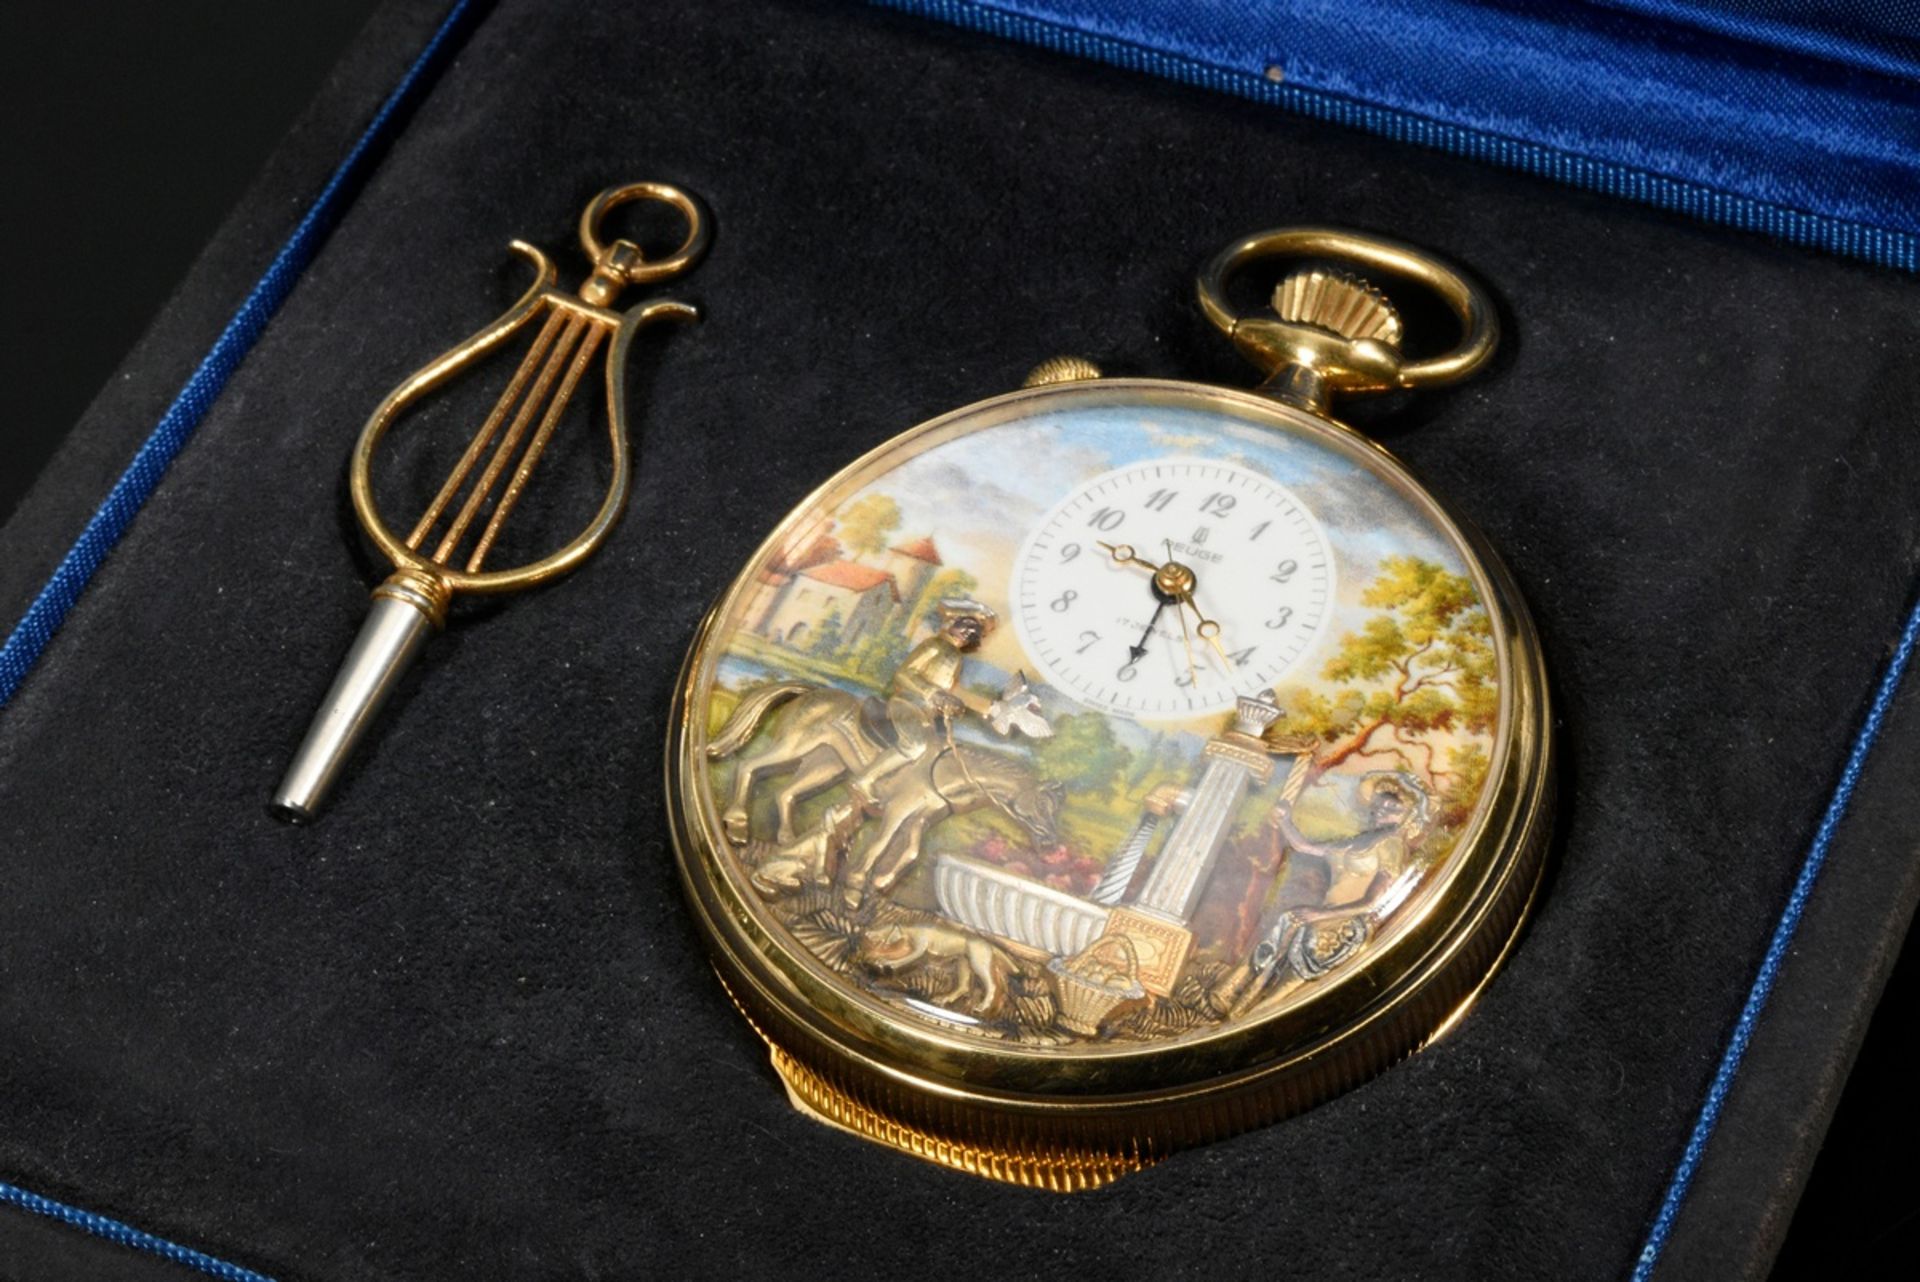 Reuge music pocket watch with alarm clock, music box and figurine automaton in silver-gilt case wit - Image 9 of 10